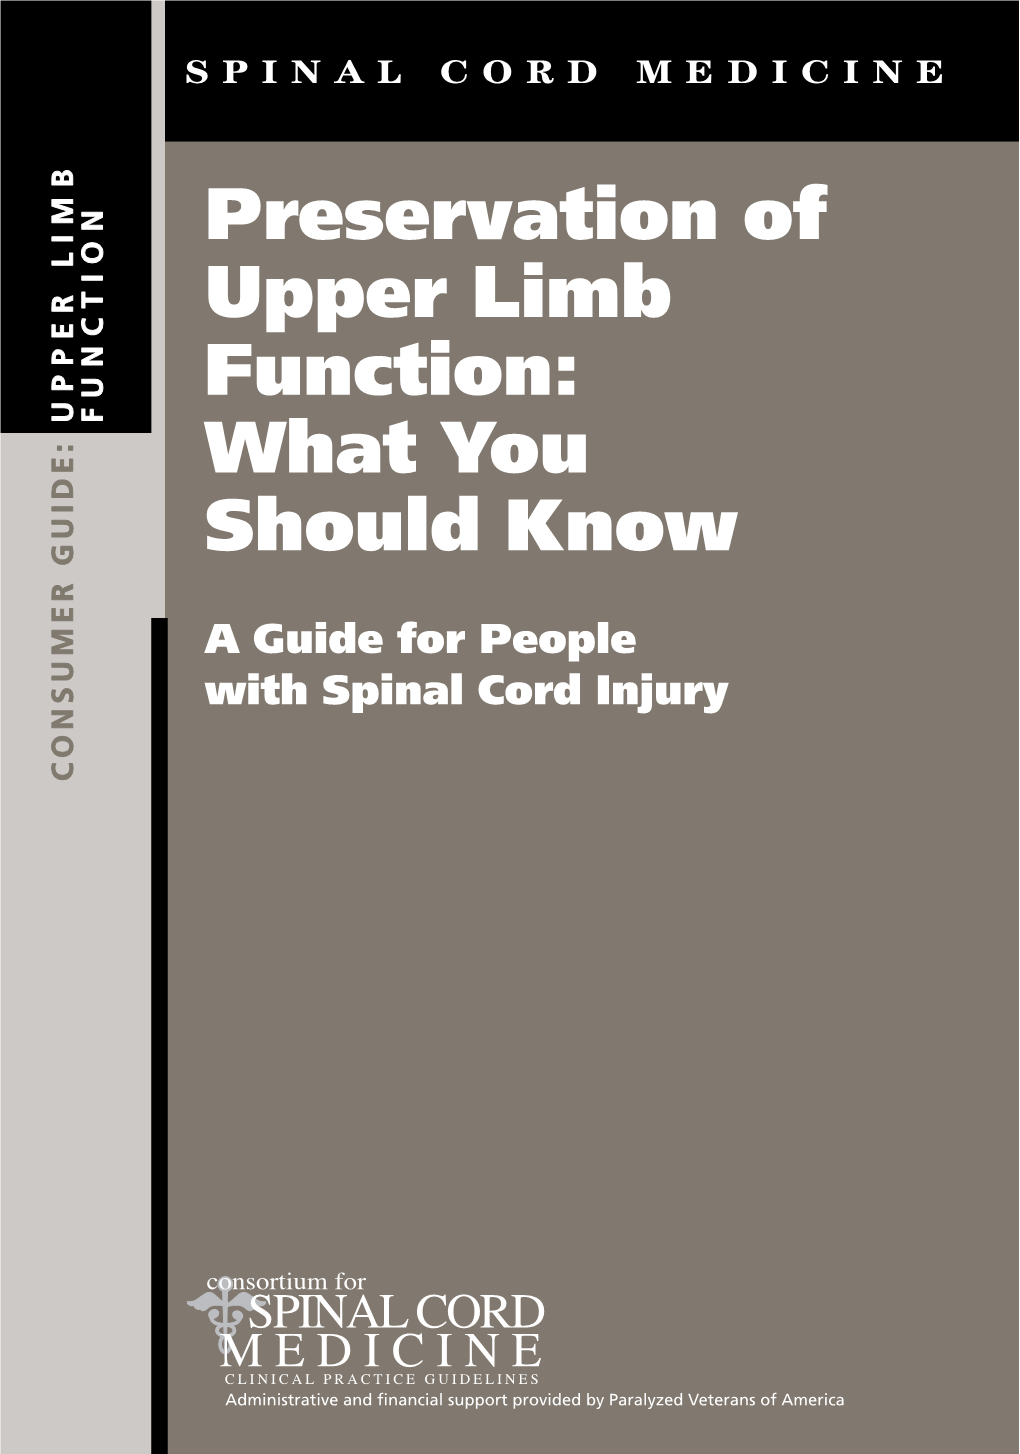 Preservation of Upper Limb Function: What You Should Know